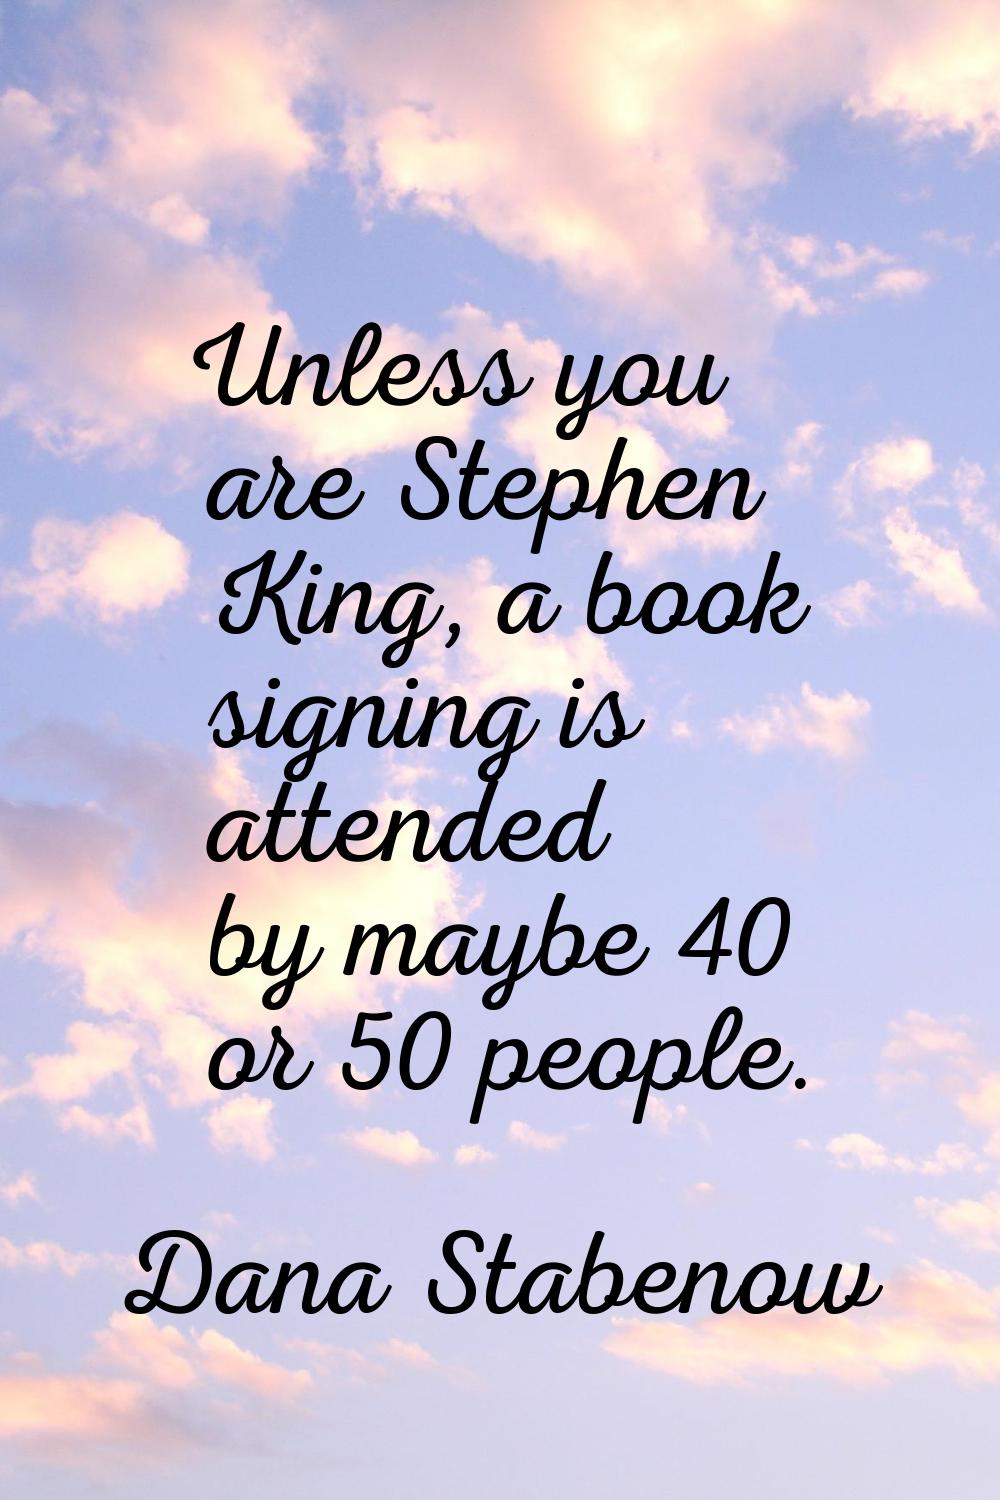 Unless you are Stephen King, a book signing is attended by maybe 40 or 50 people.